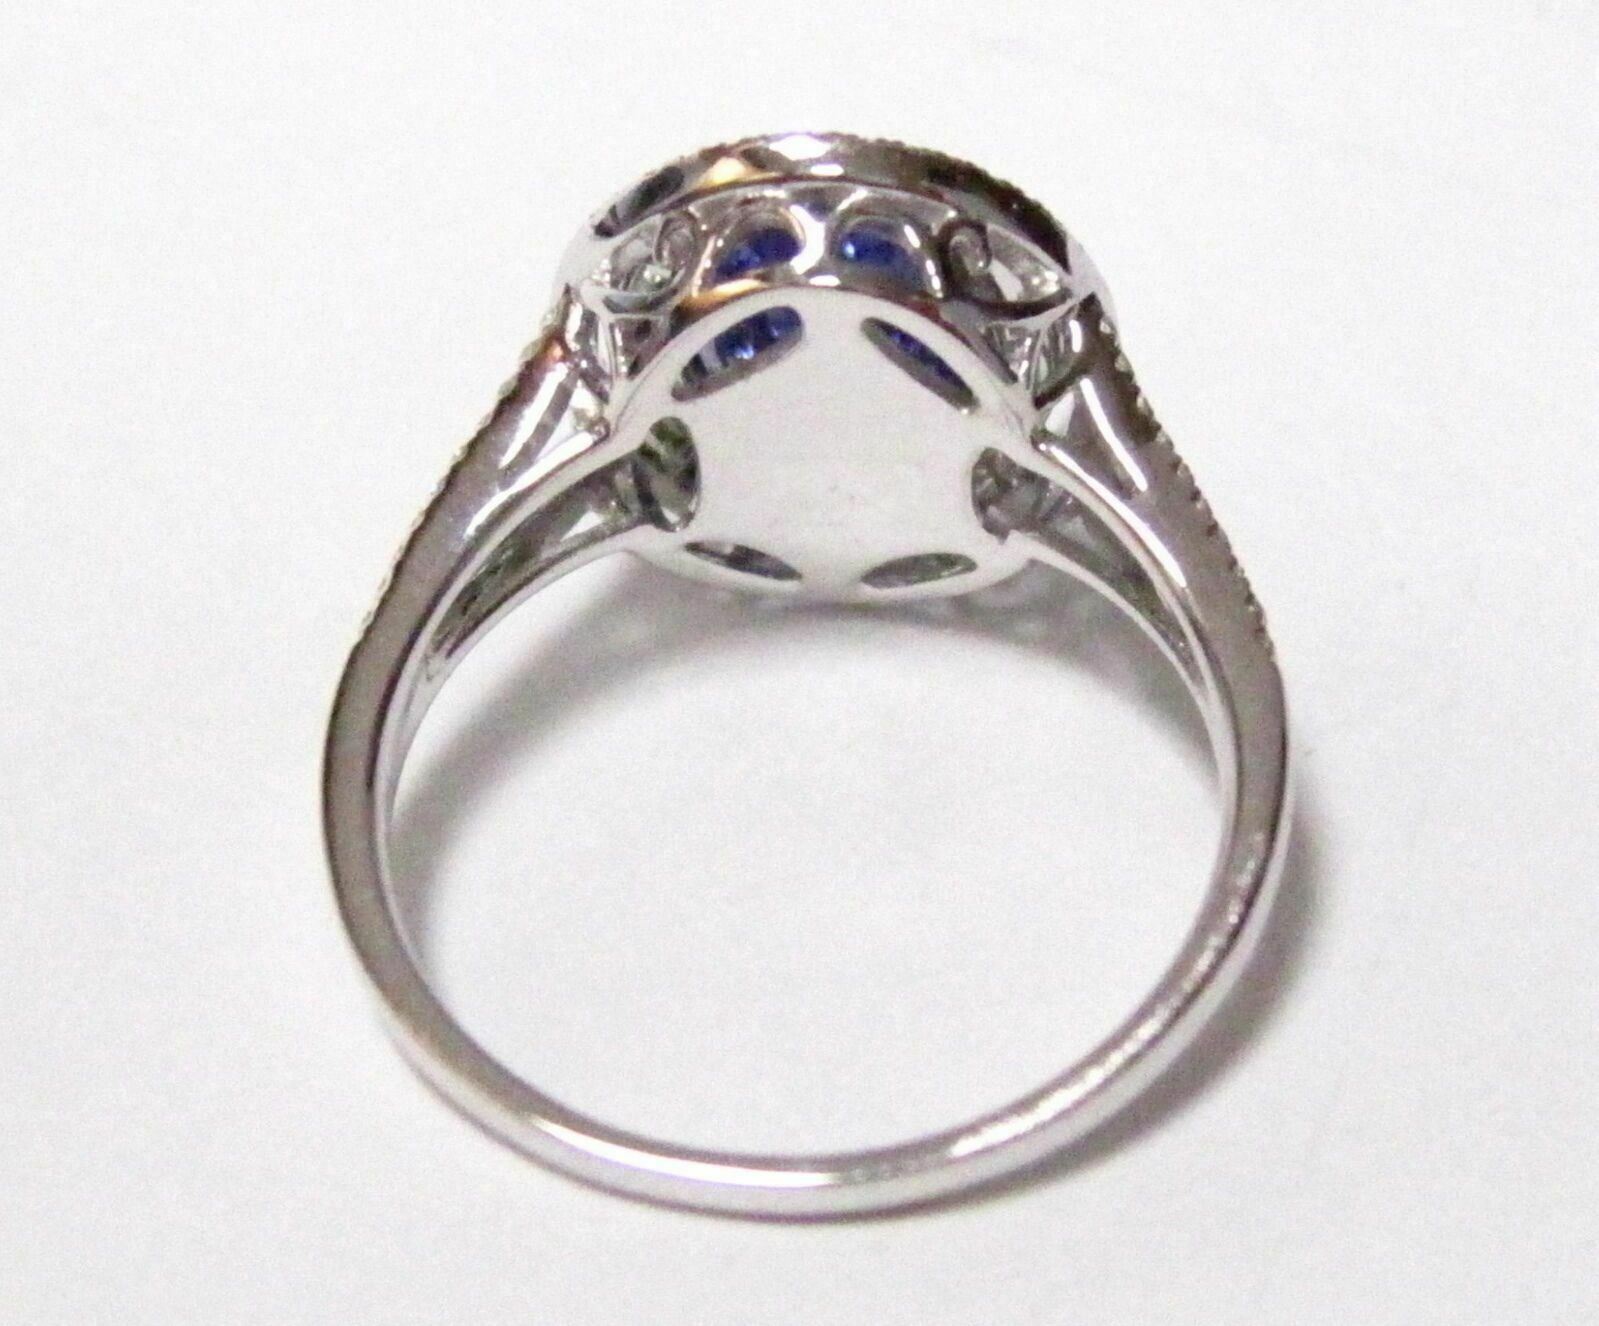 2.75 TCW Oval Tanzanite & Diamond Accents Cocktail/Anniversary Ring Size 7 14k